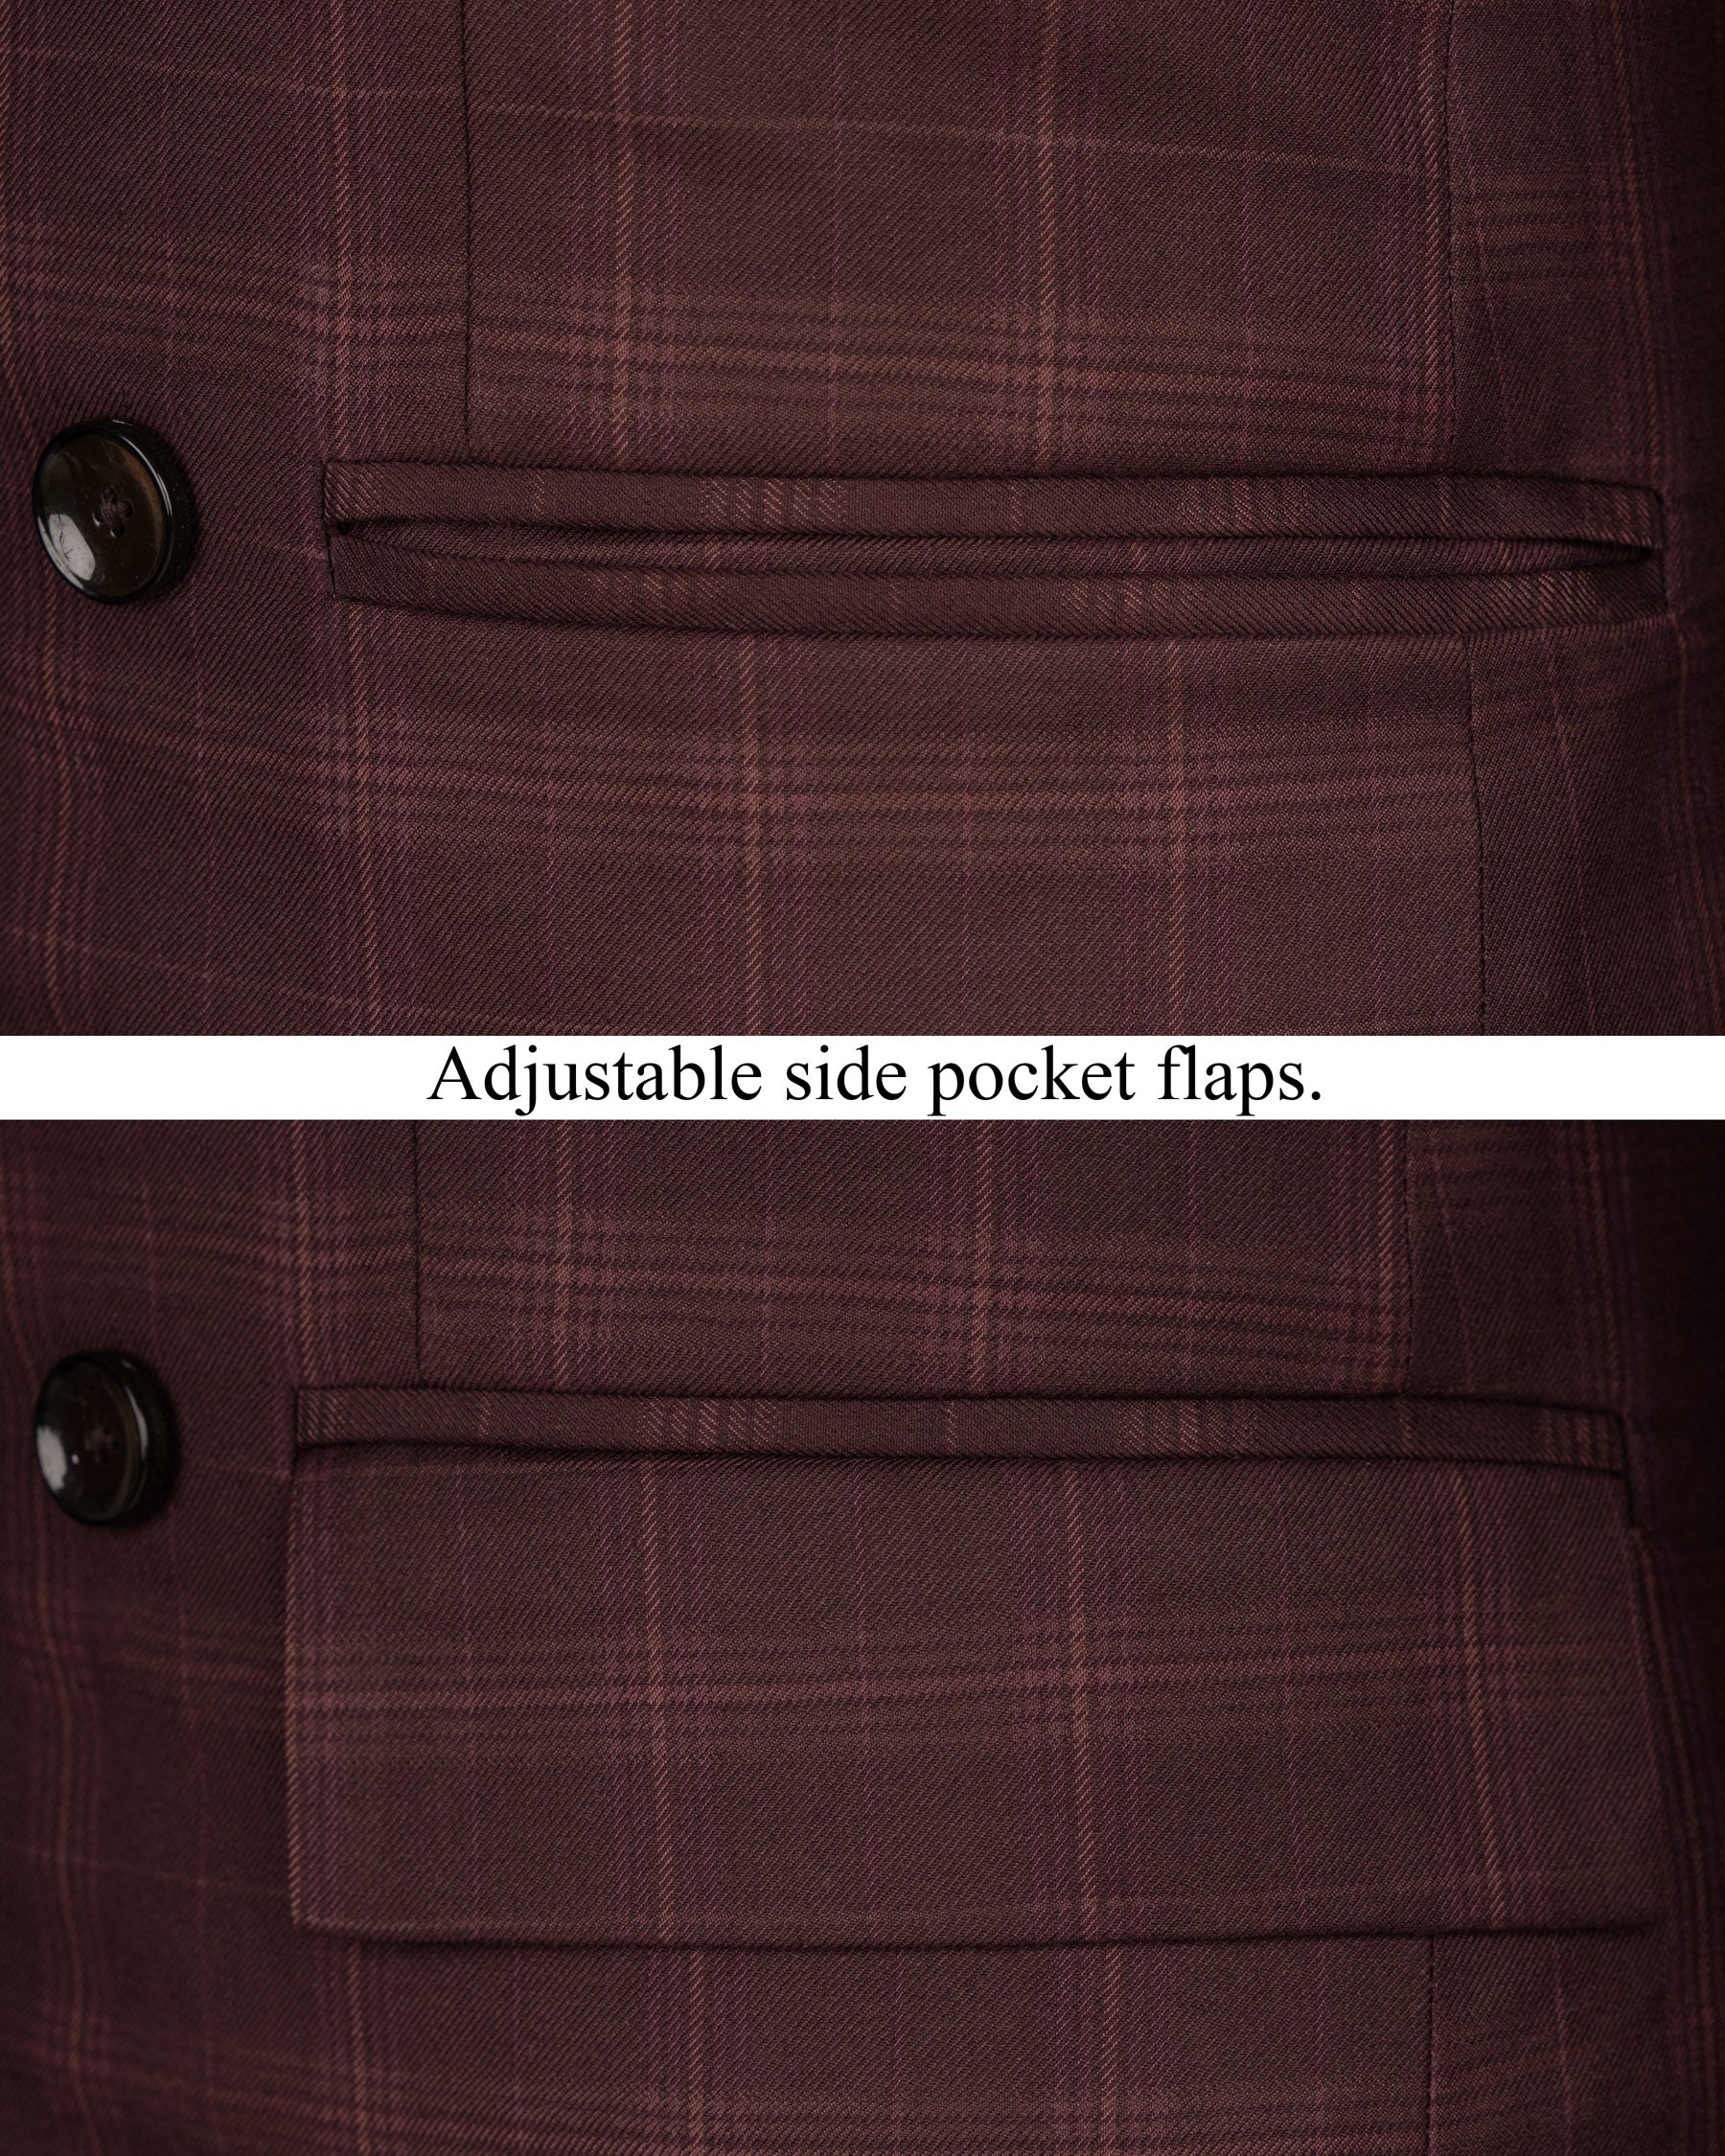 Crater Brown Super fine Plaid Double Breasted Wool Rich Blazer BL1607-DB-36, BL1607-DB-38, BL1607-DB-40, BL1607-DB-42, BL1607-DB-44, BL1607-DB-46, BL1607-DB-48, BL1607-DB-50, BL1607-DB-52, BL1607-DB-54, BL1607-DB-56, BL1607-DB-58, BL1607-DB-60